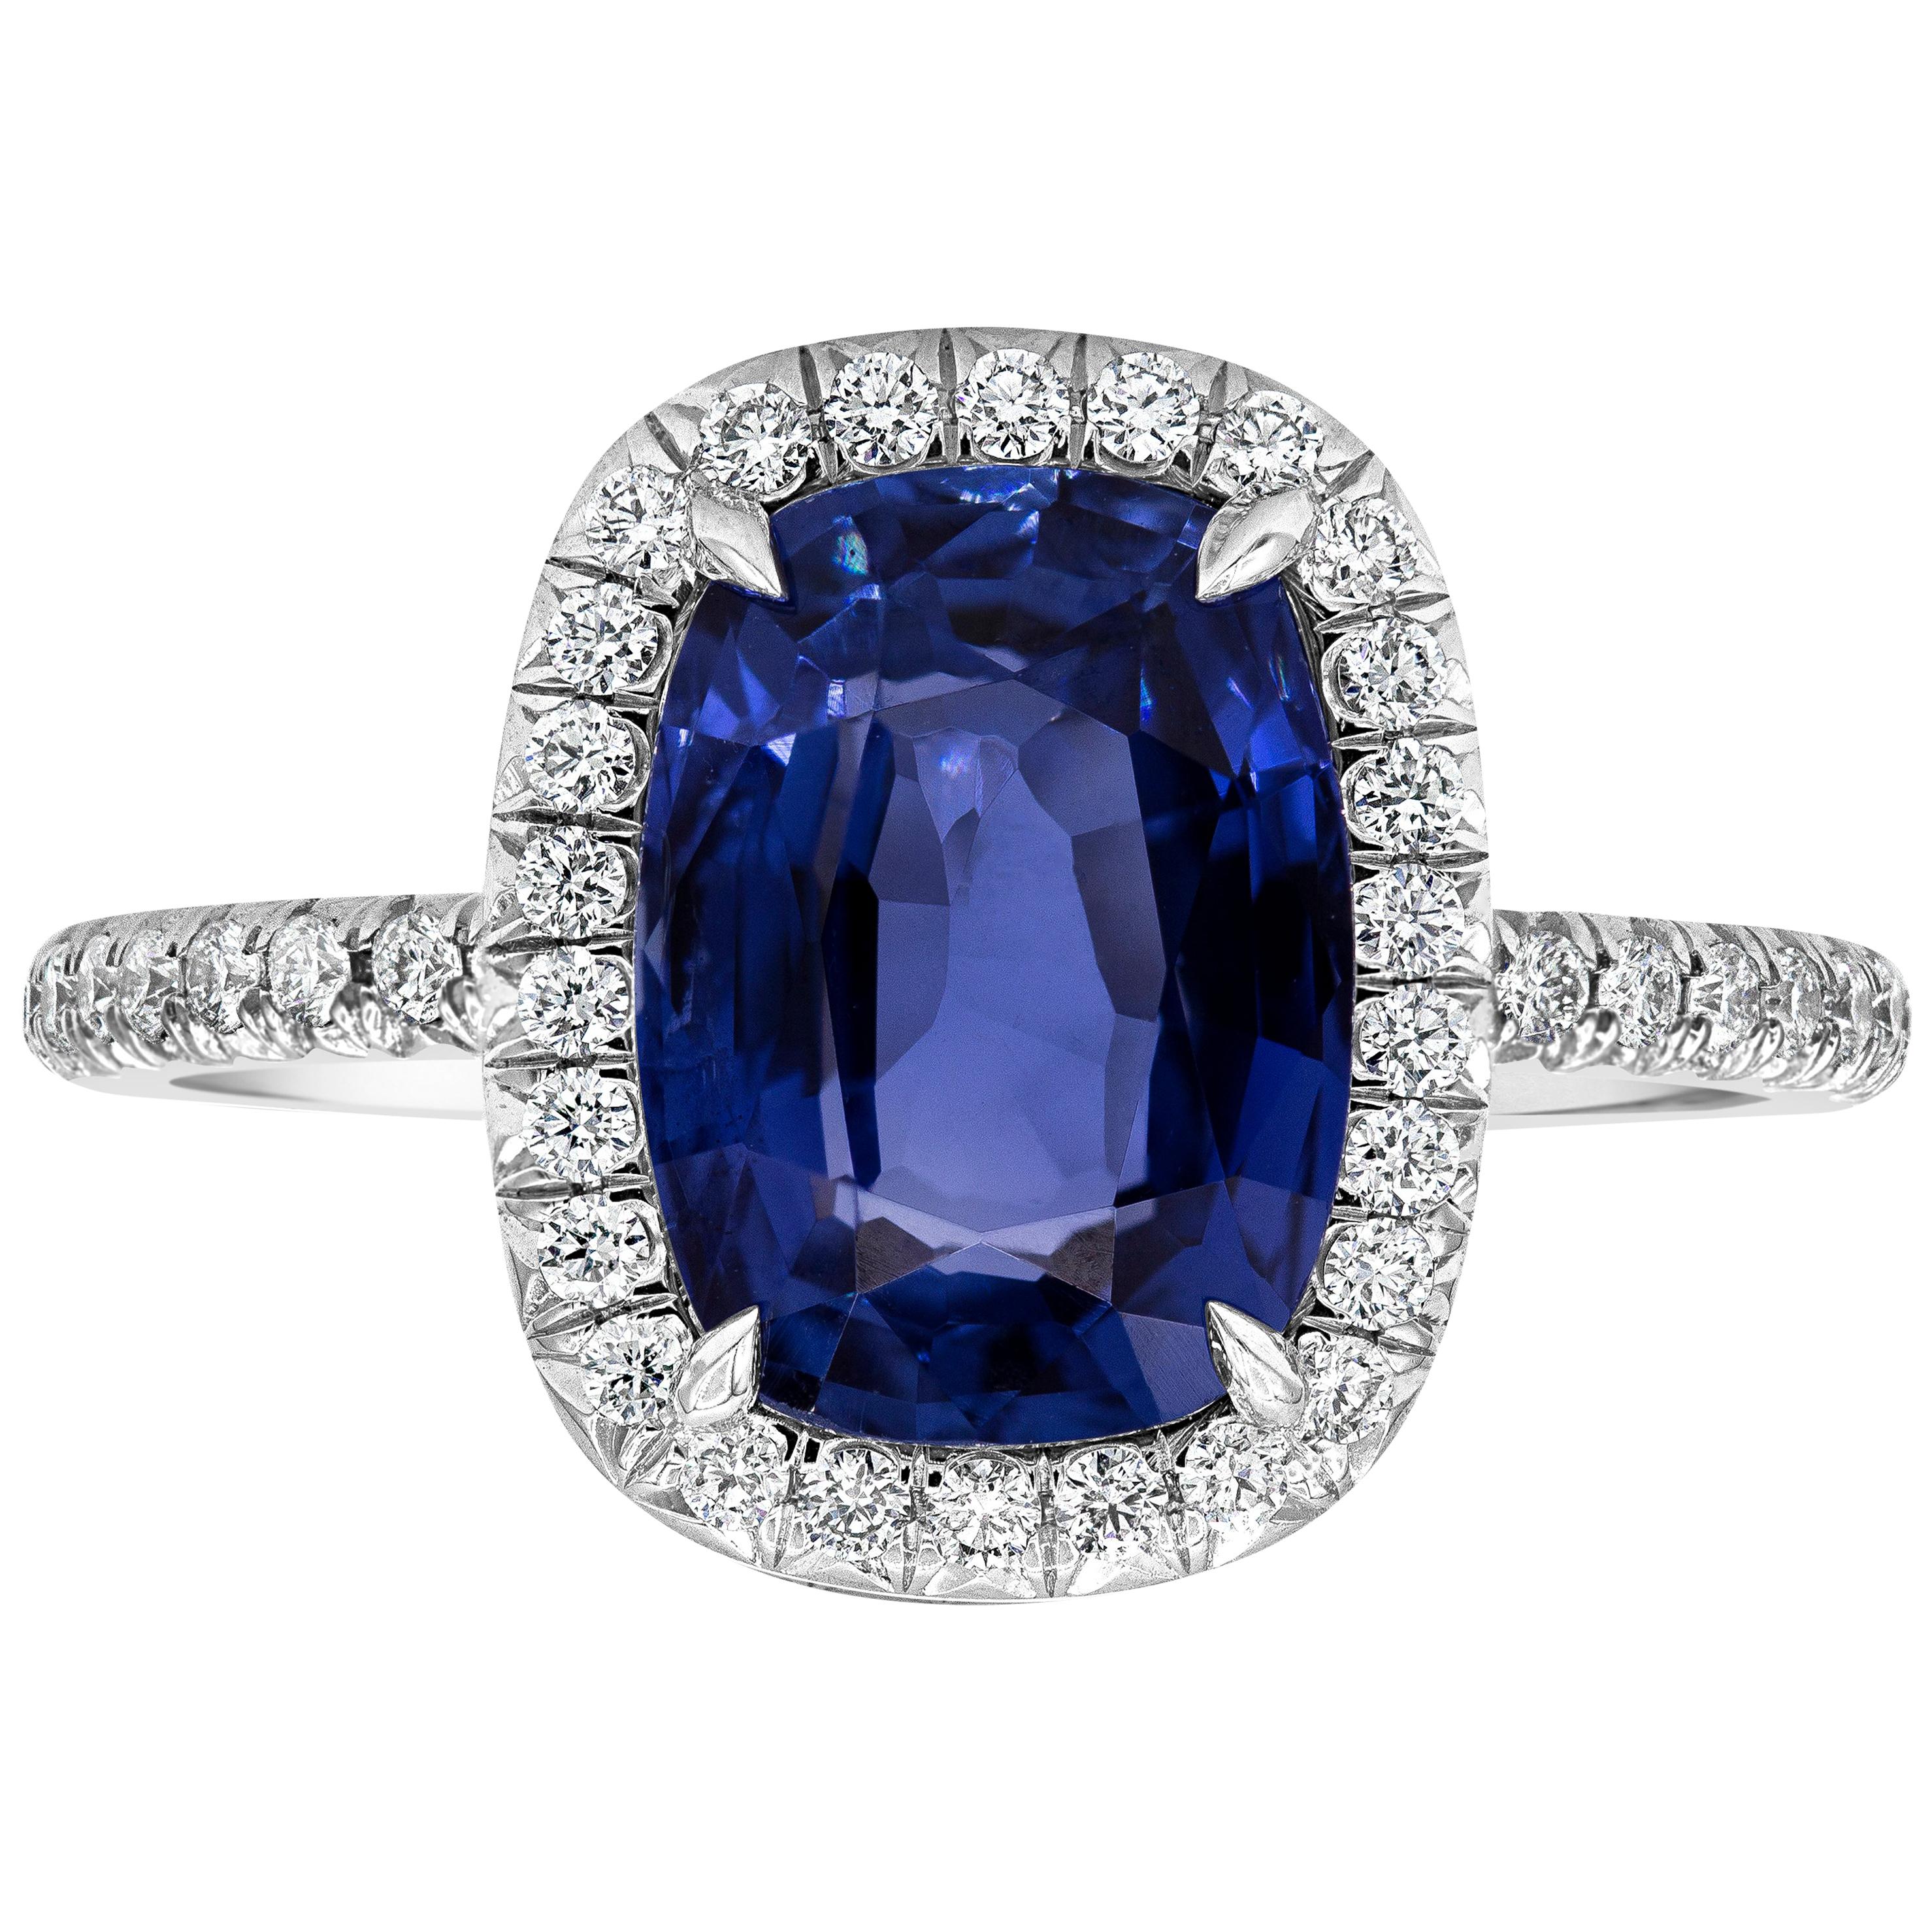 GIA Certified 3.37 Carat Cushion Cut Sapphire with Diamond Halo Engagement Ring